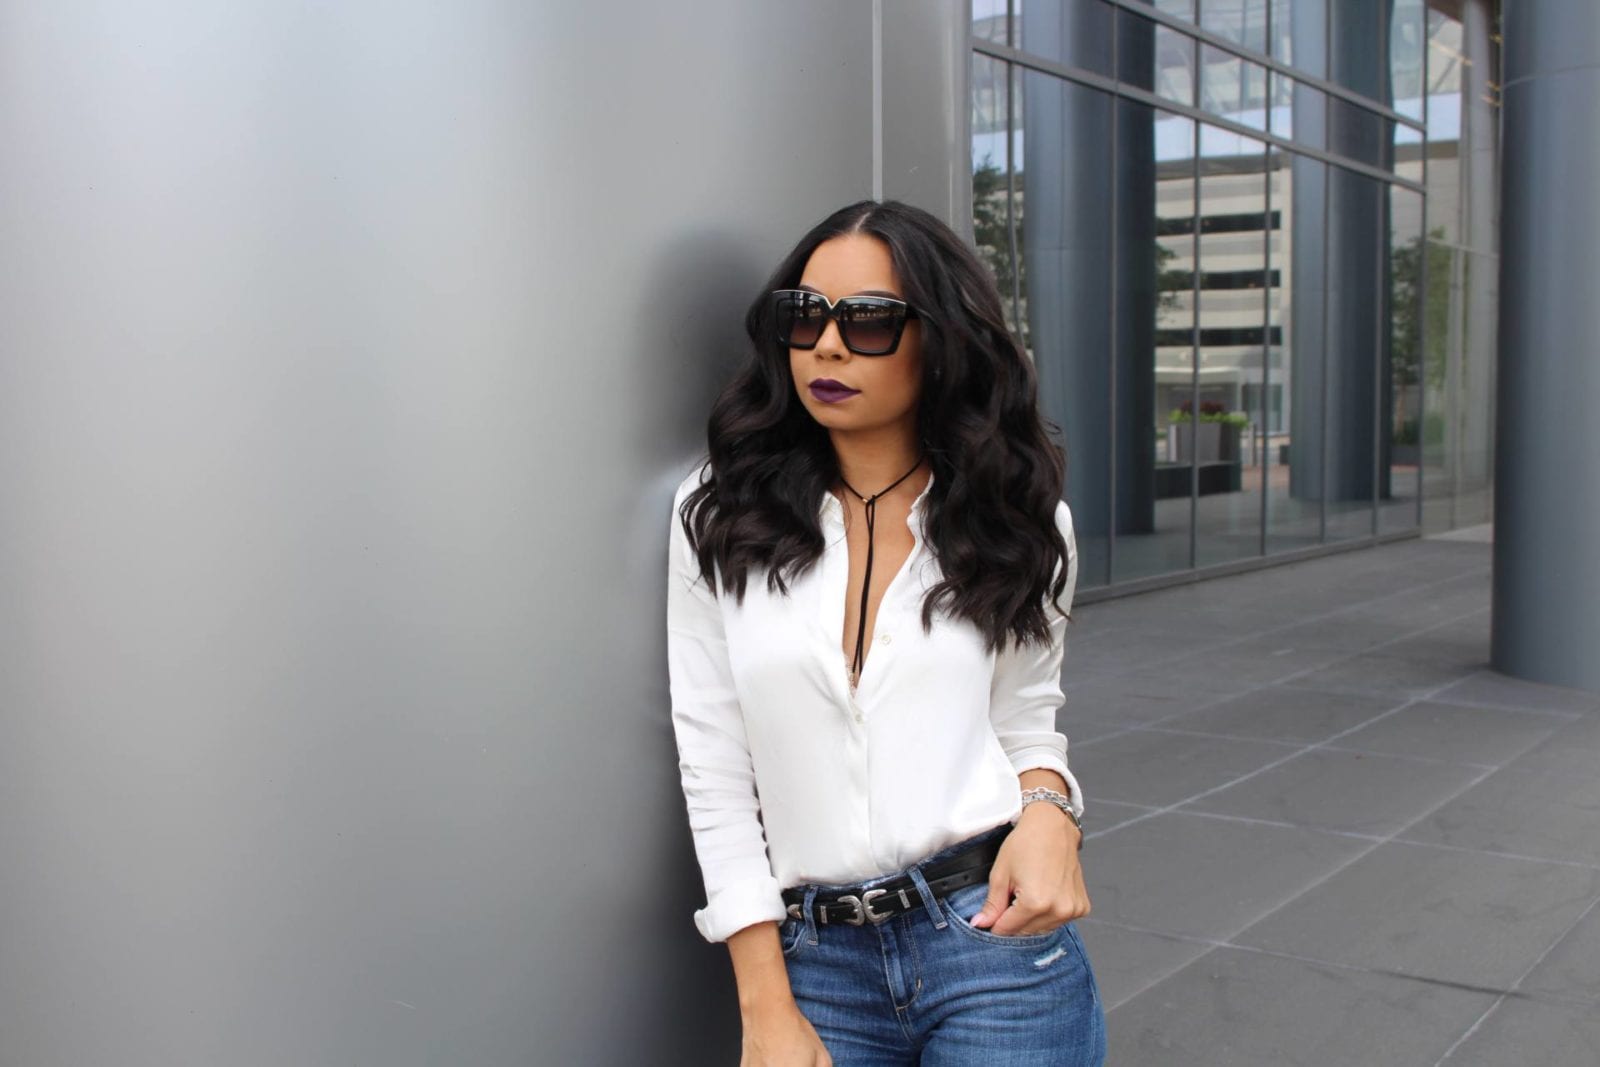 Silk Blouse, Joe's Jeans and L.A.M.B. Mules | The B Werd Style Guide